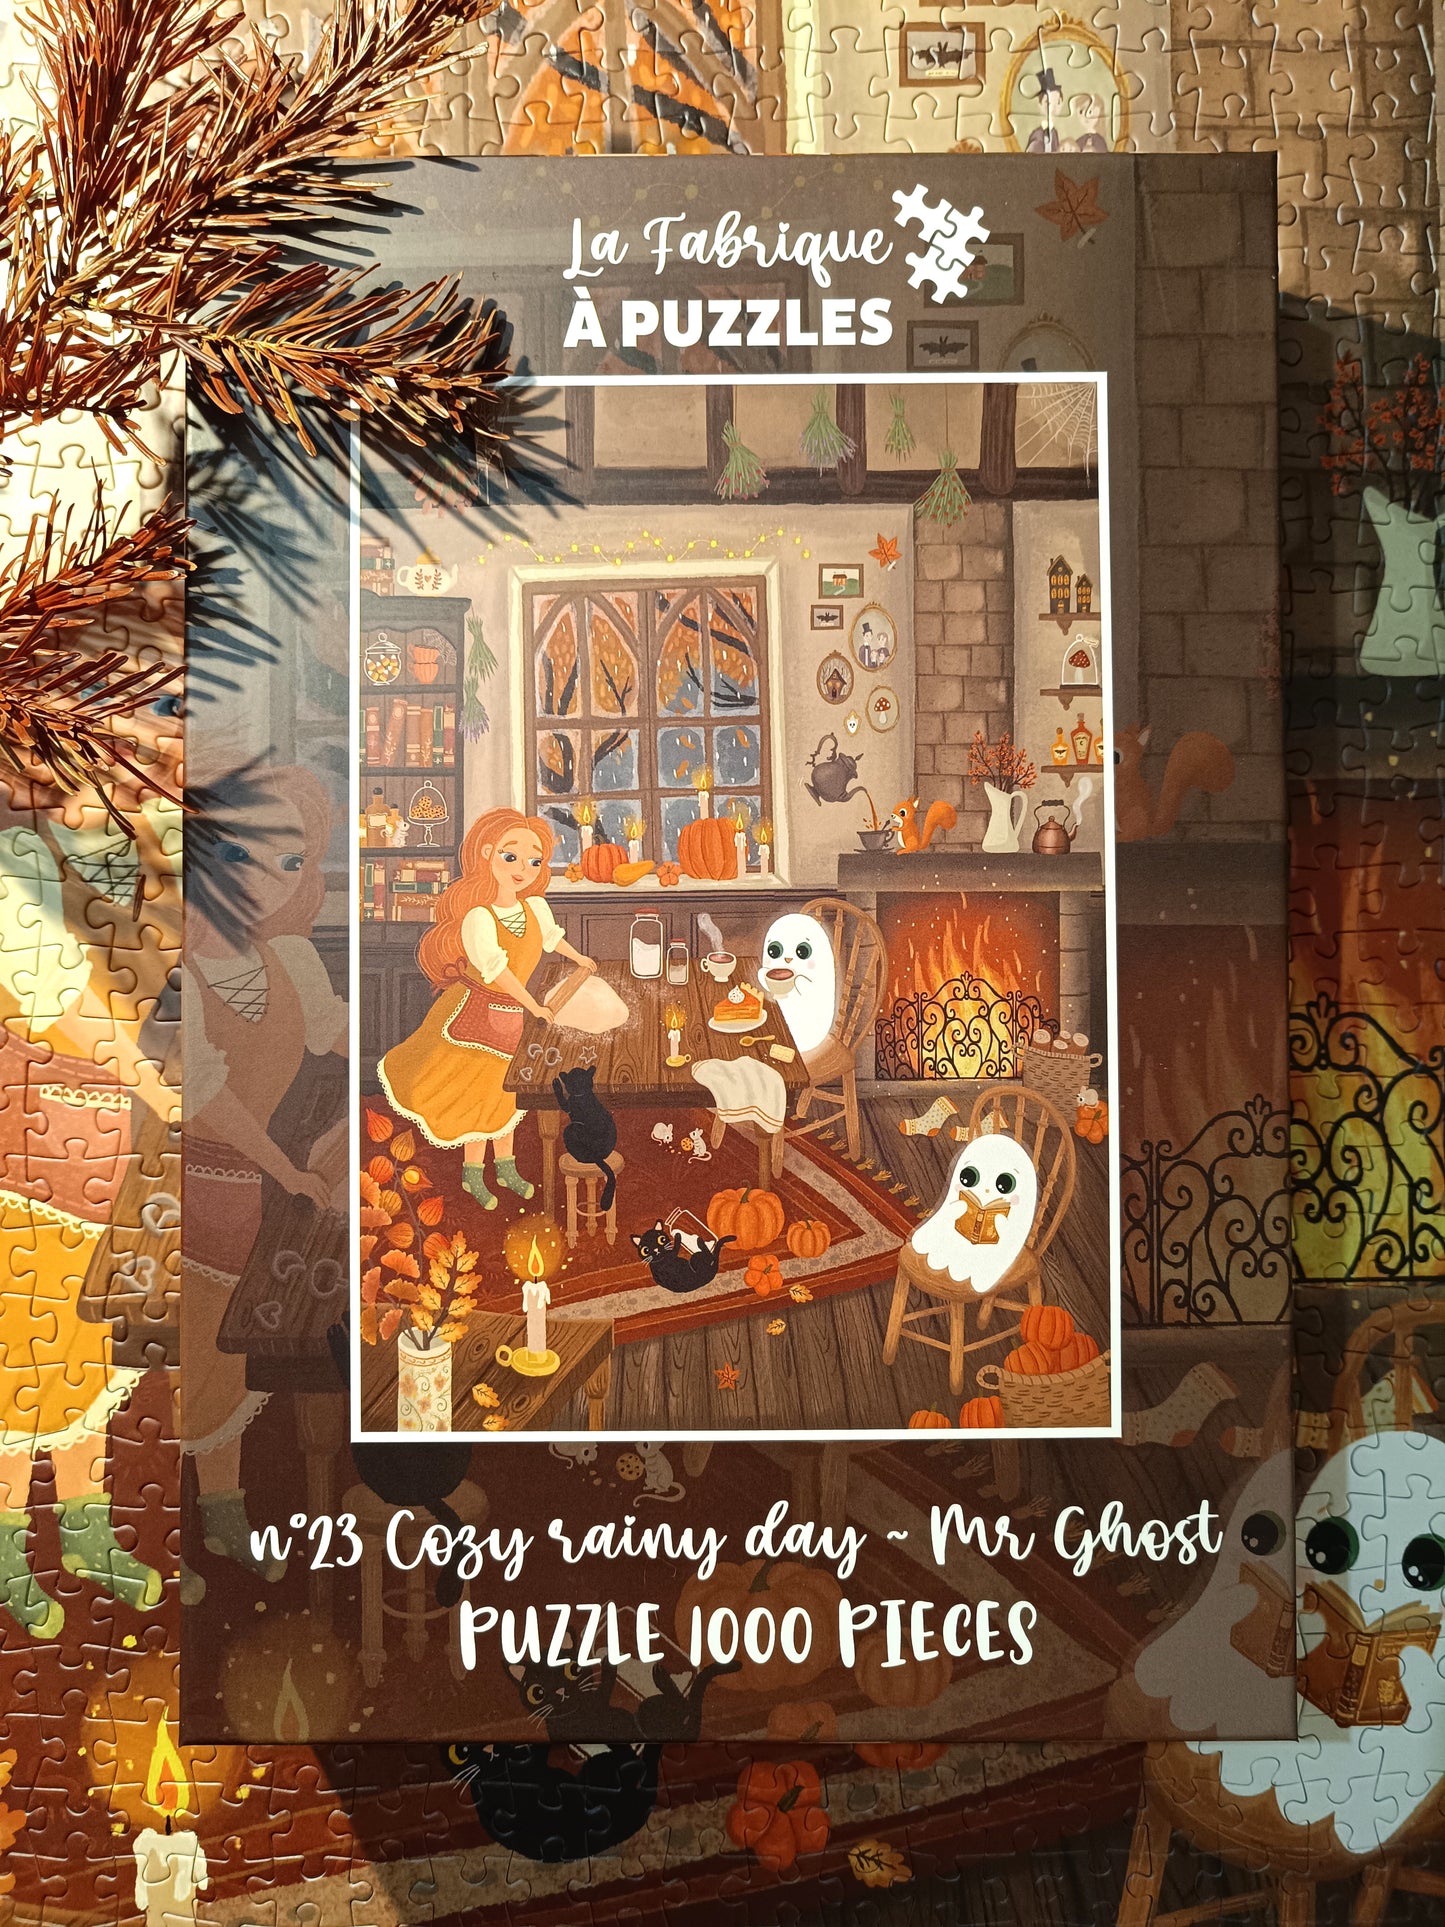 Puzzle n°23 "Cozy rainy day ~ Mr Ghost" 1000 pieces by Sérénitam